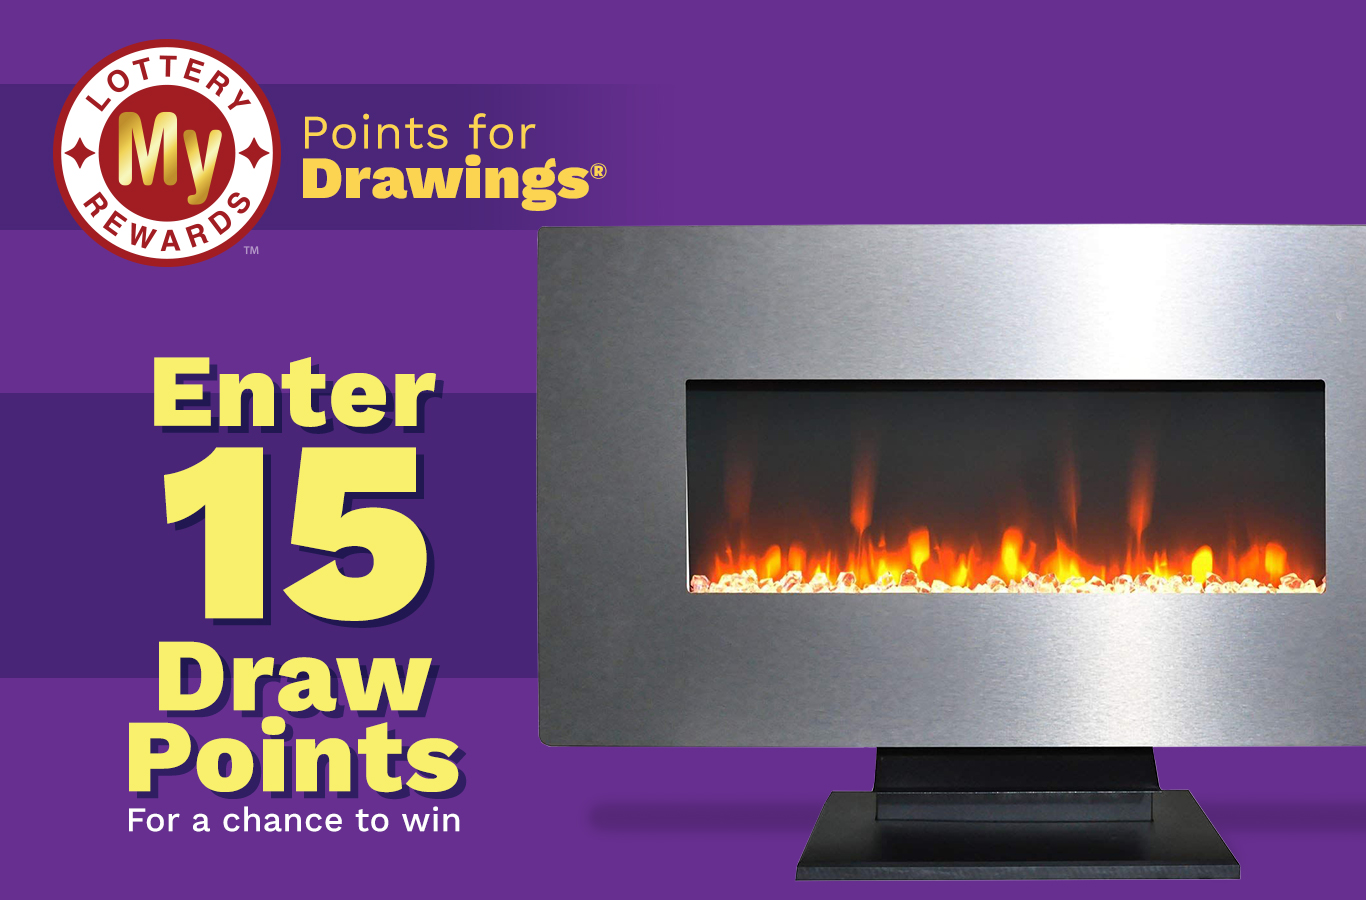 Here's your chance to win an Electric Fireplace! Enter by Tuesday, December 7th.